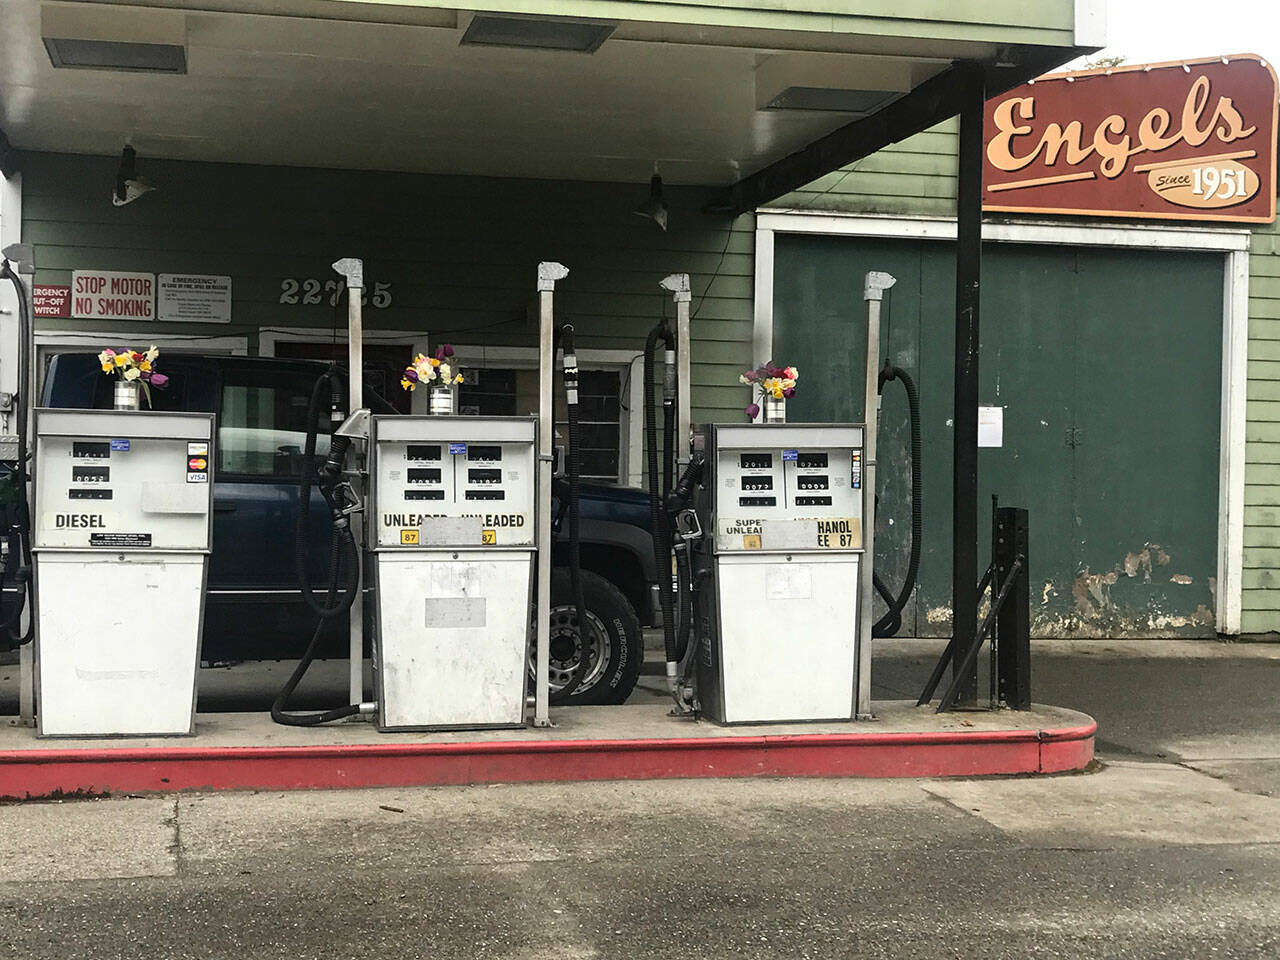 (Christine Carpenter Photo) Vases of flowers sit atop the gas pumps at Engels Repair & Towing.